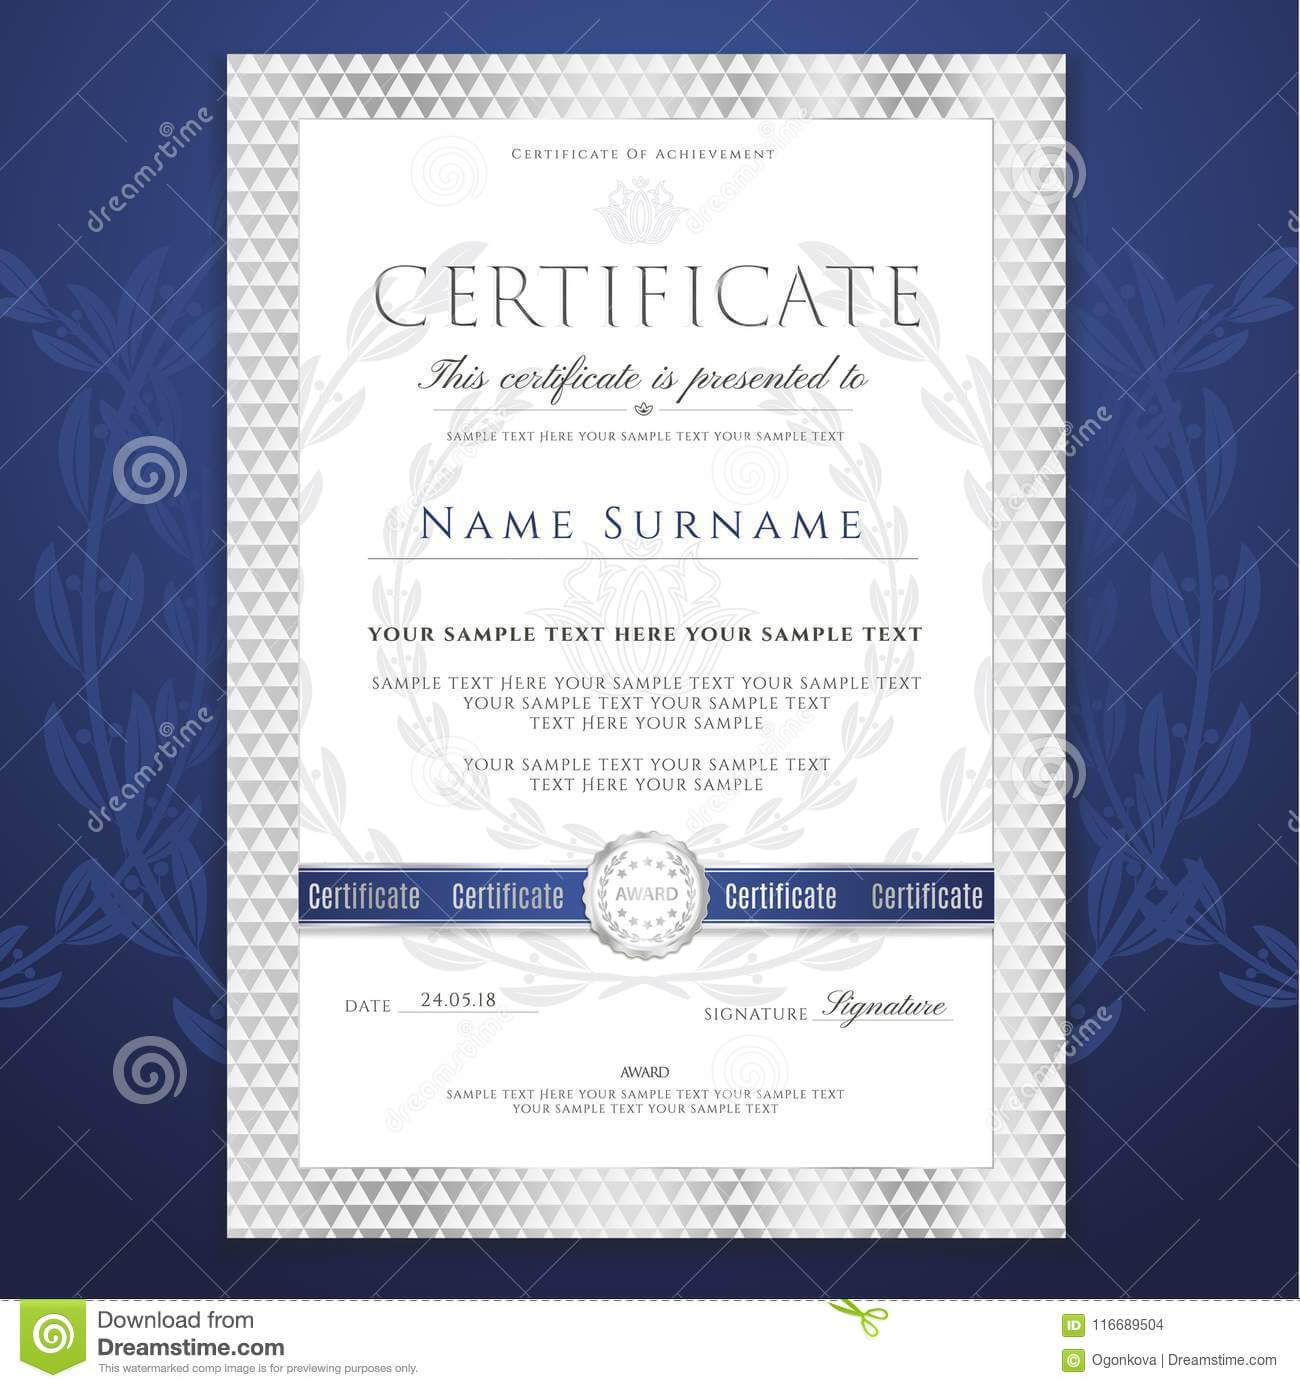 Certificate Template. Printable / Editable Design For With Sample Award Certificates Templates